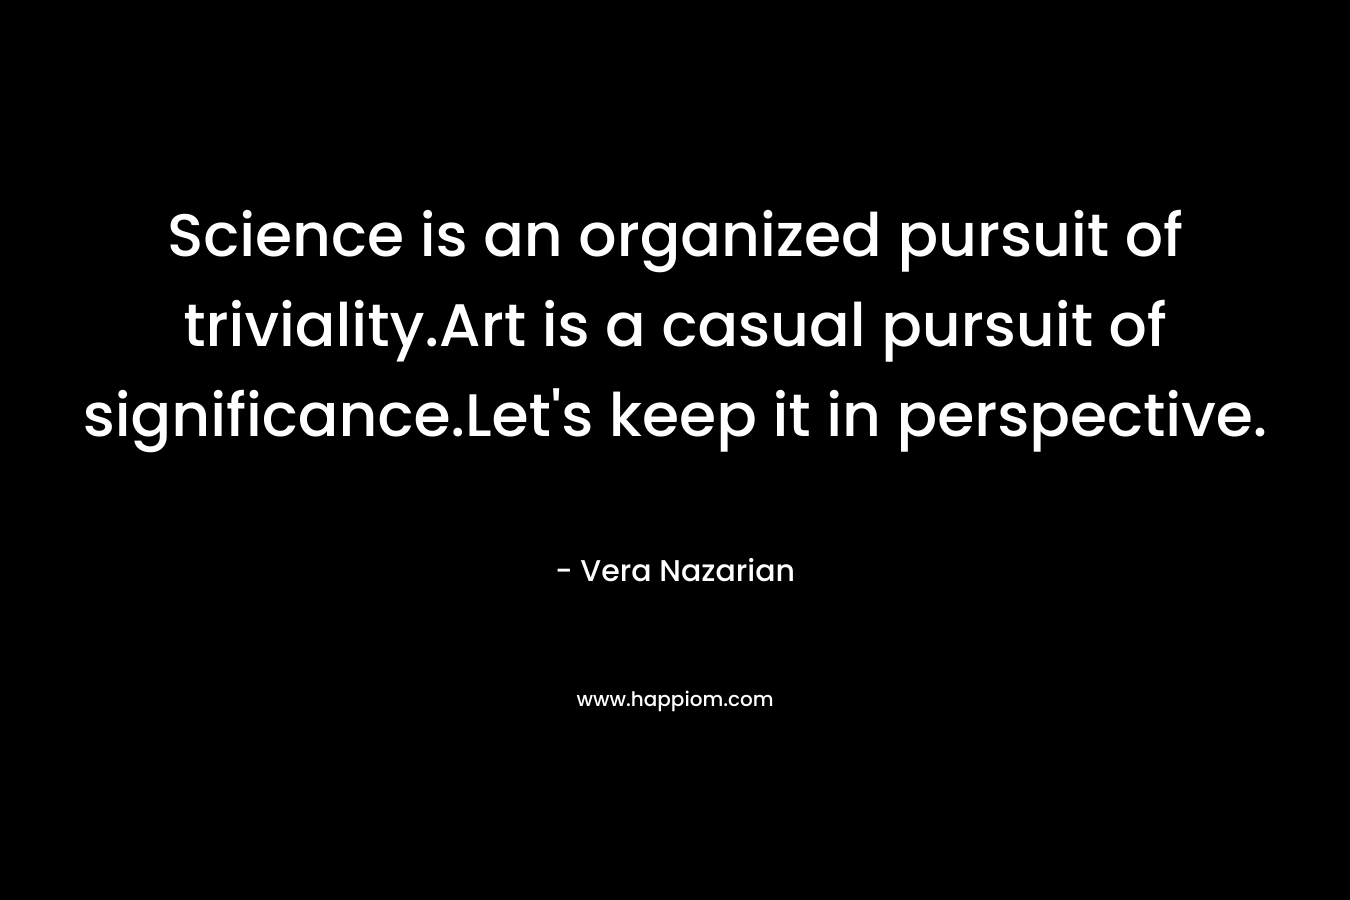 Science is an organized pursuit of triviality.Art is a casual pursuit of significance.Let's keep it in perspective.